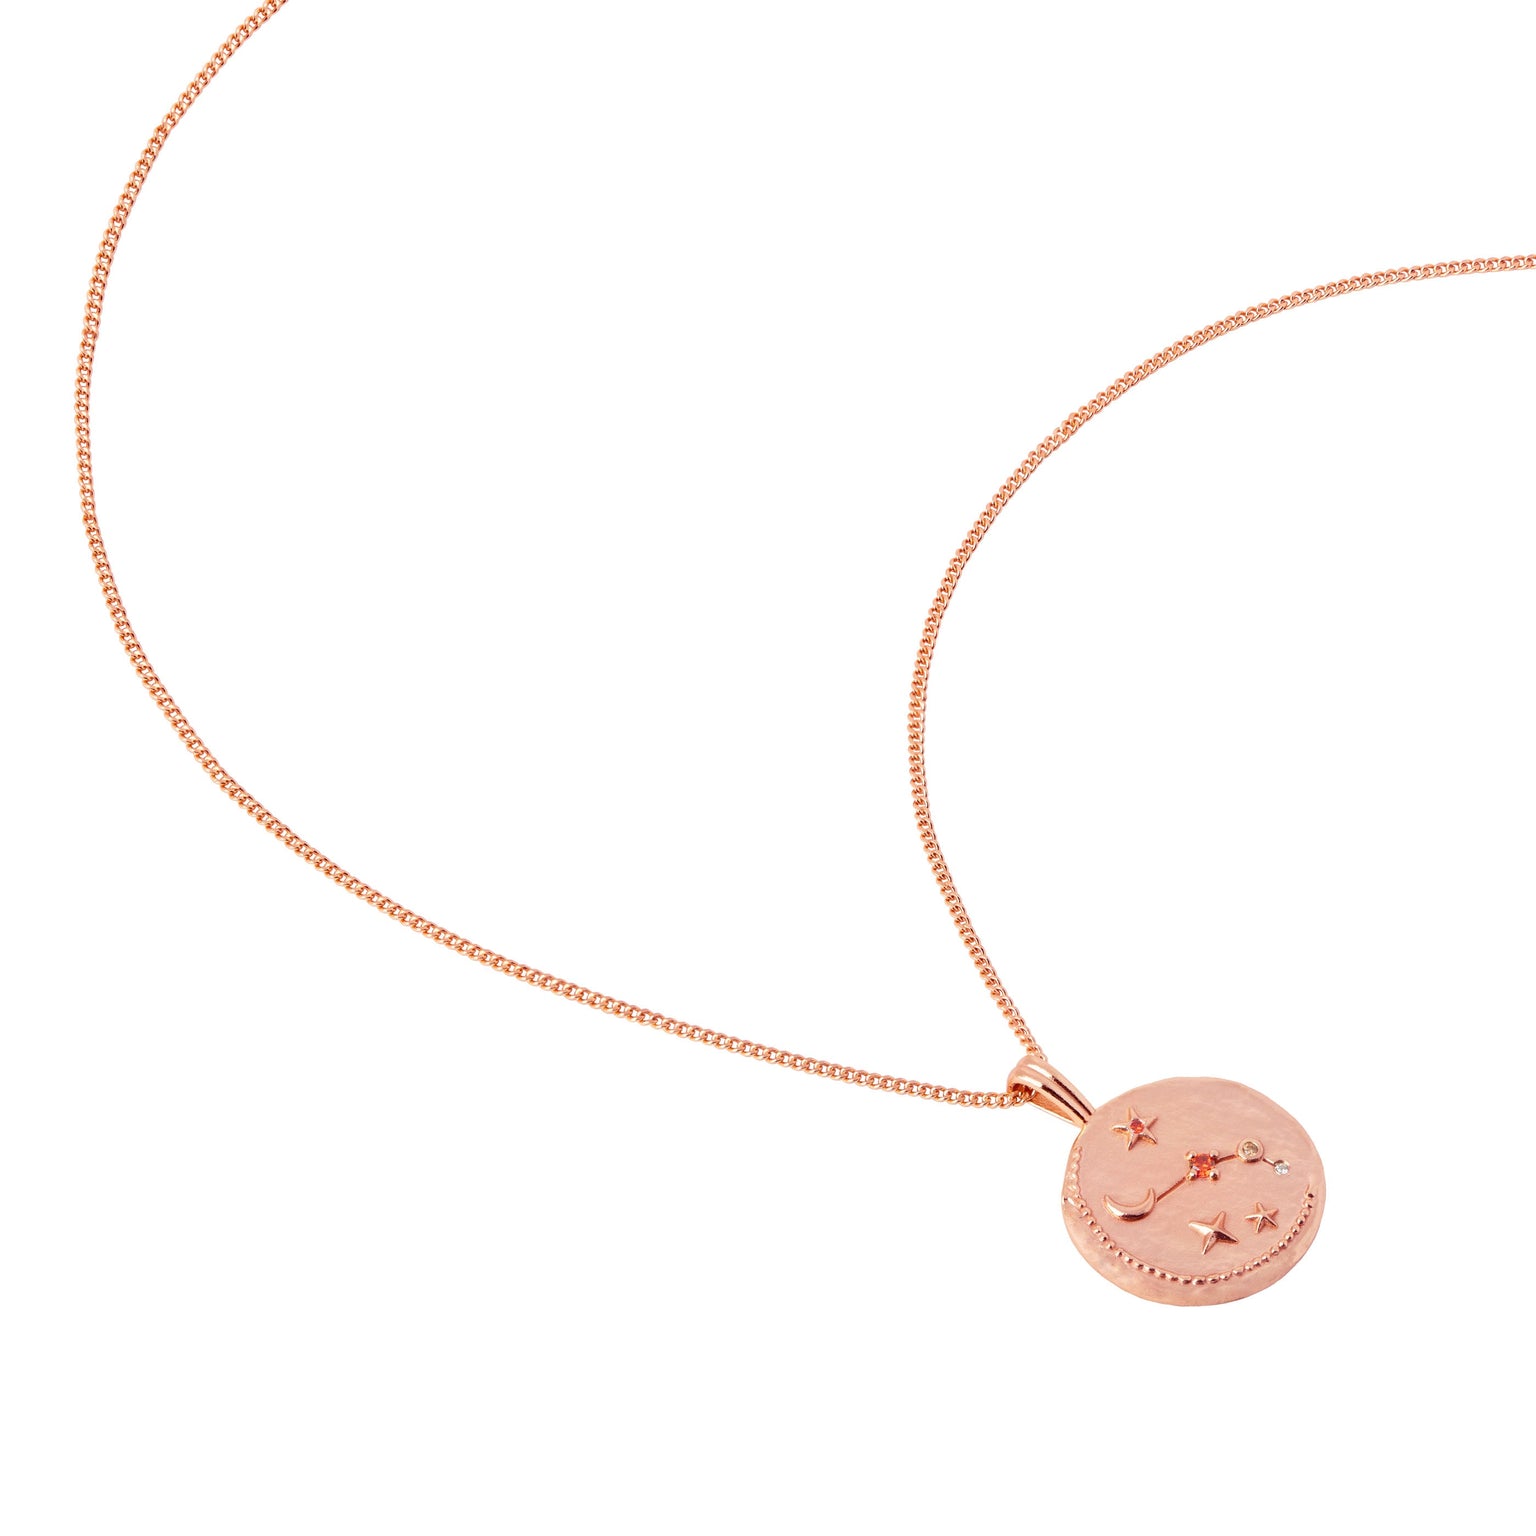 Aries Zodiac Pendant Necklace in Rose Gold